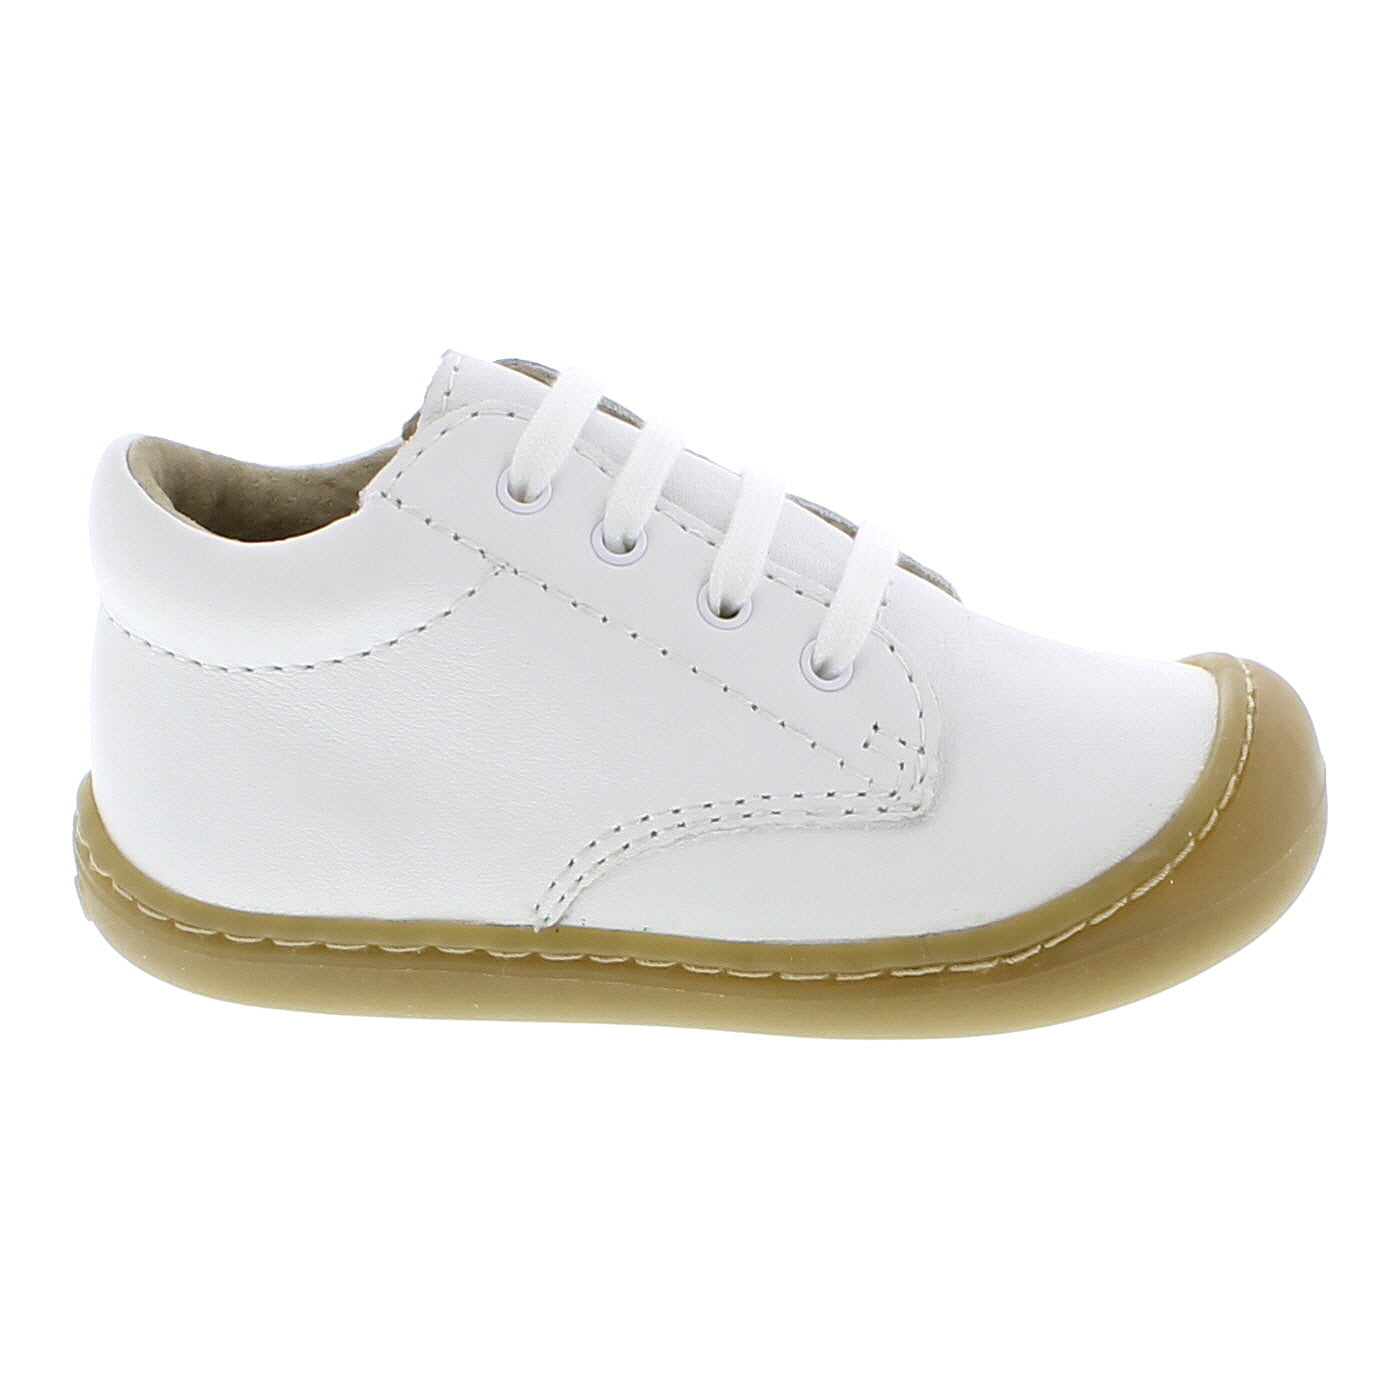 Reagan Lace Bootie - White Leather